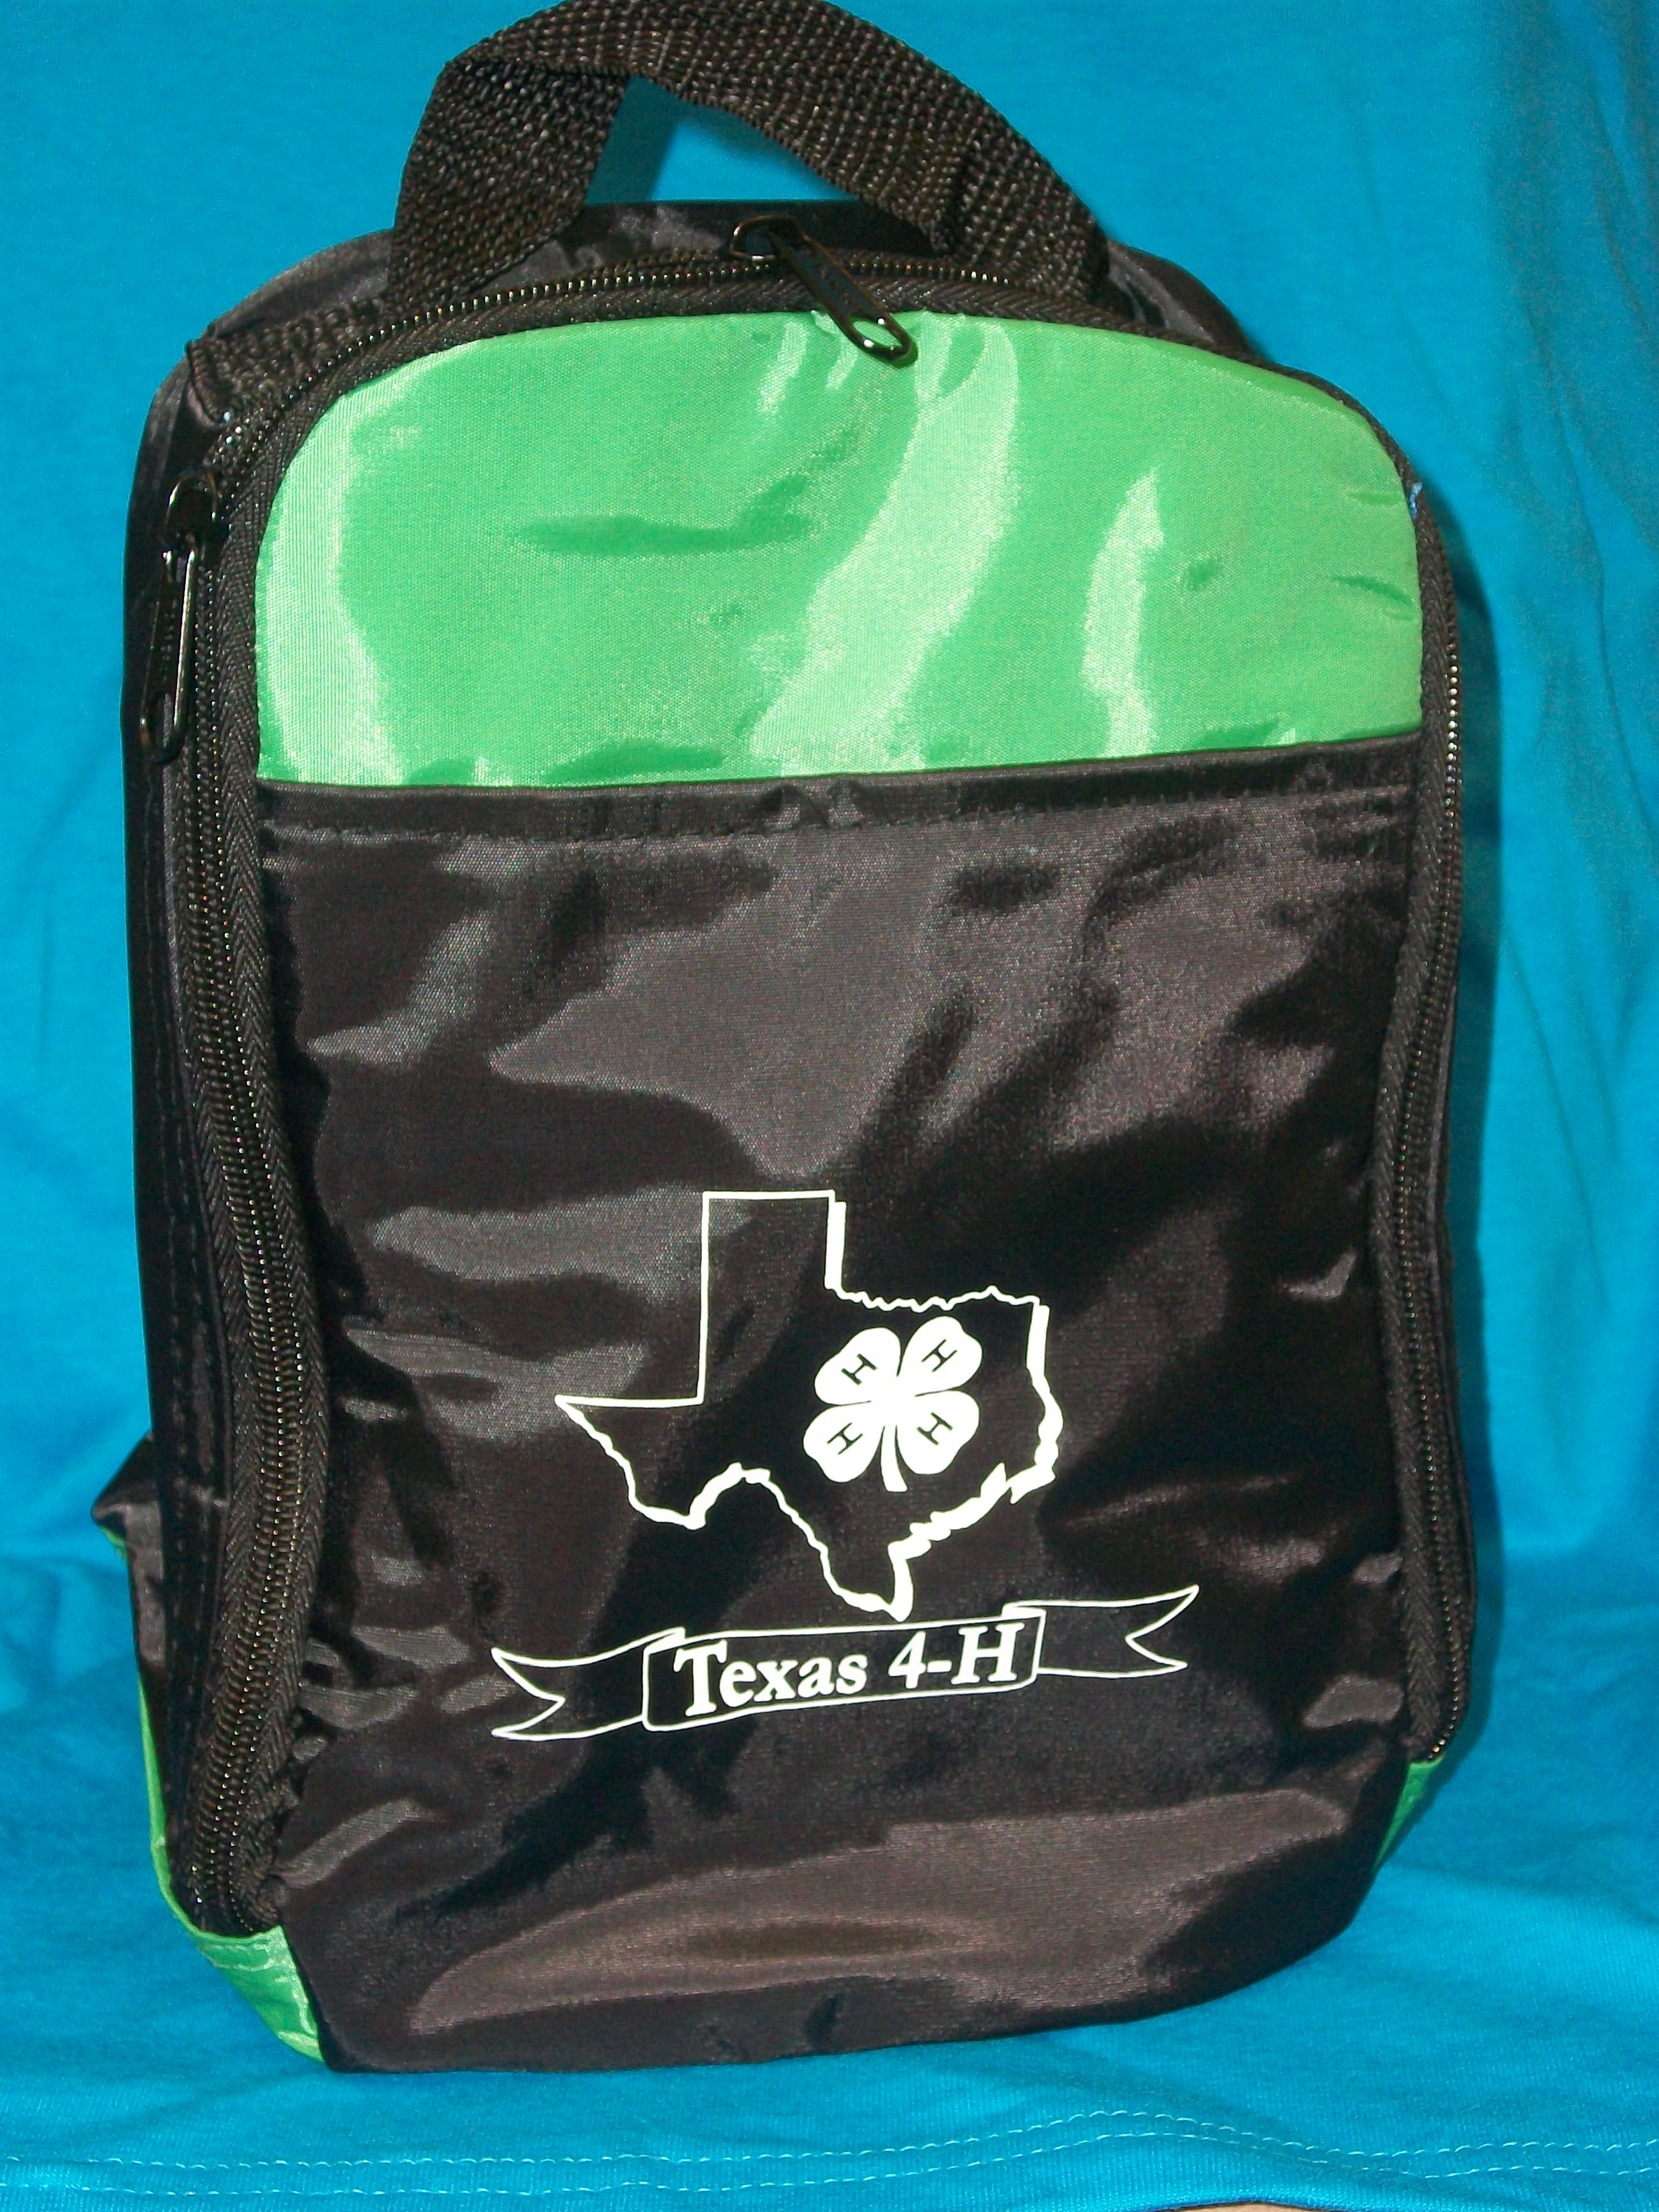 13 Insulated Texas 4-H Lunch Bag